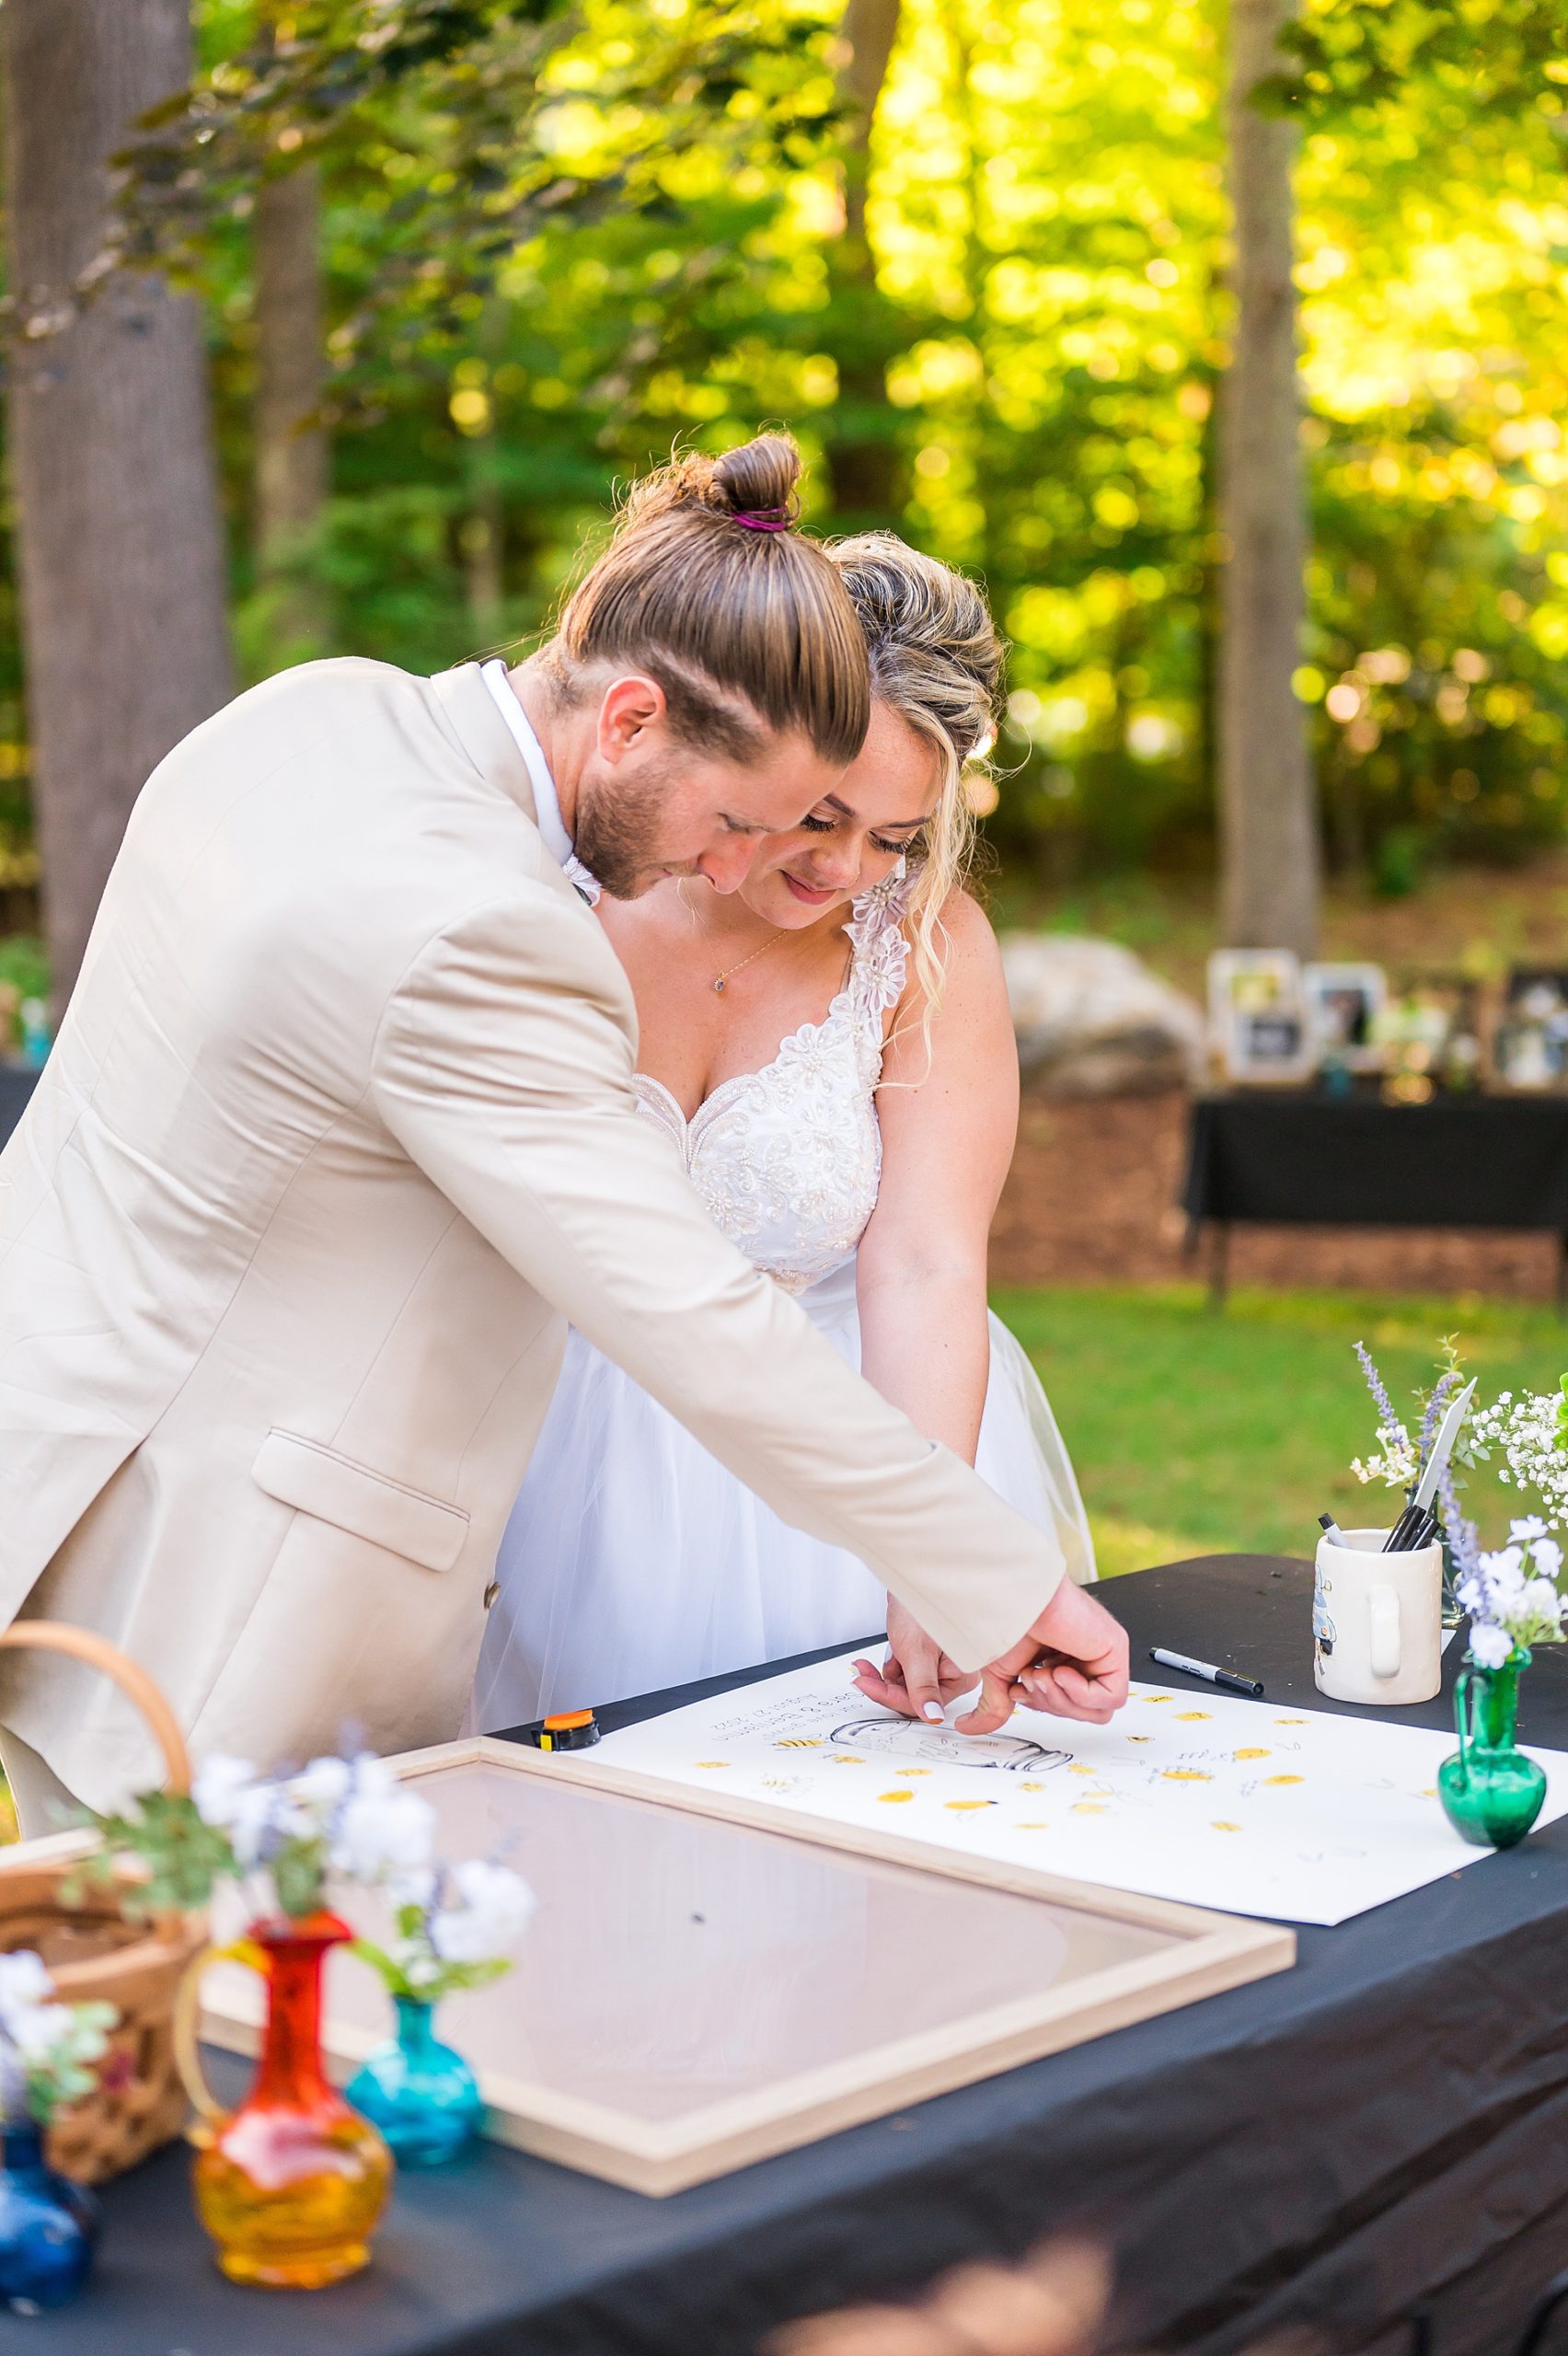 newlyweds place their thumbprint in their guestbook